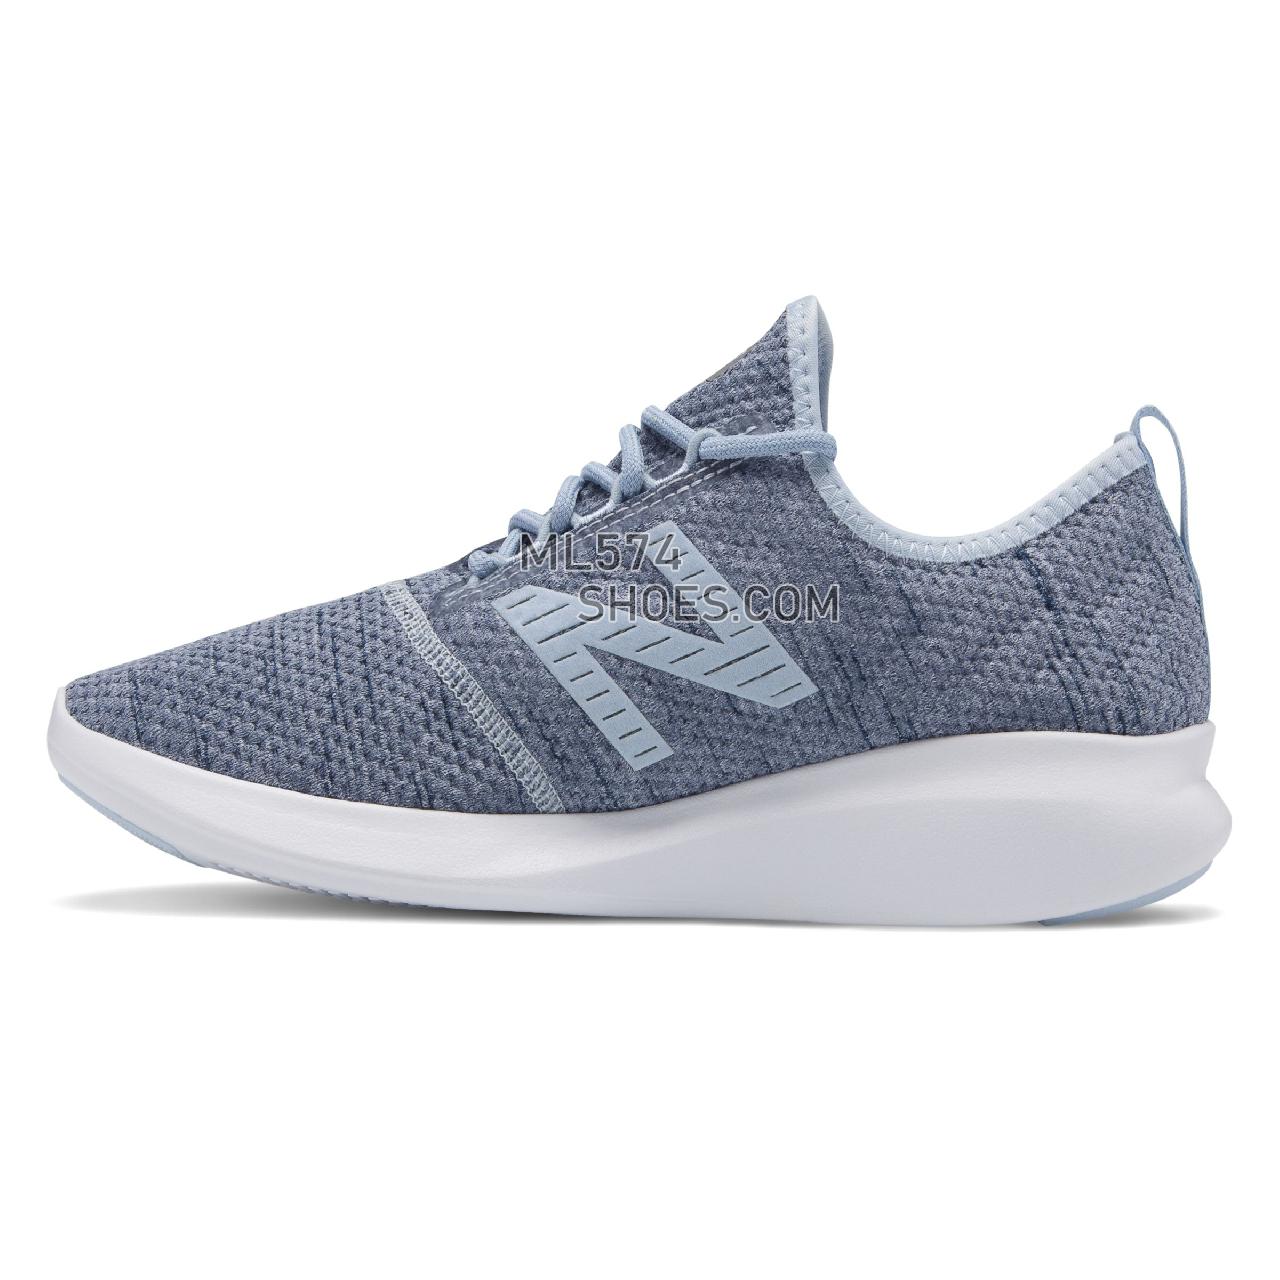 New Balance FuelCore Coast v4 Hoodie - Women's 4 - Running Petrol with Galaxy - WCSTLRR4